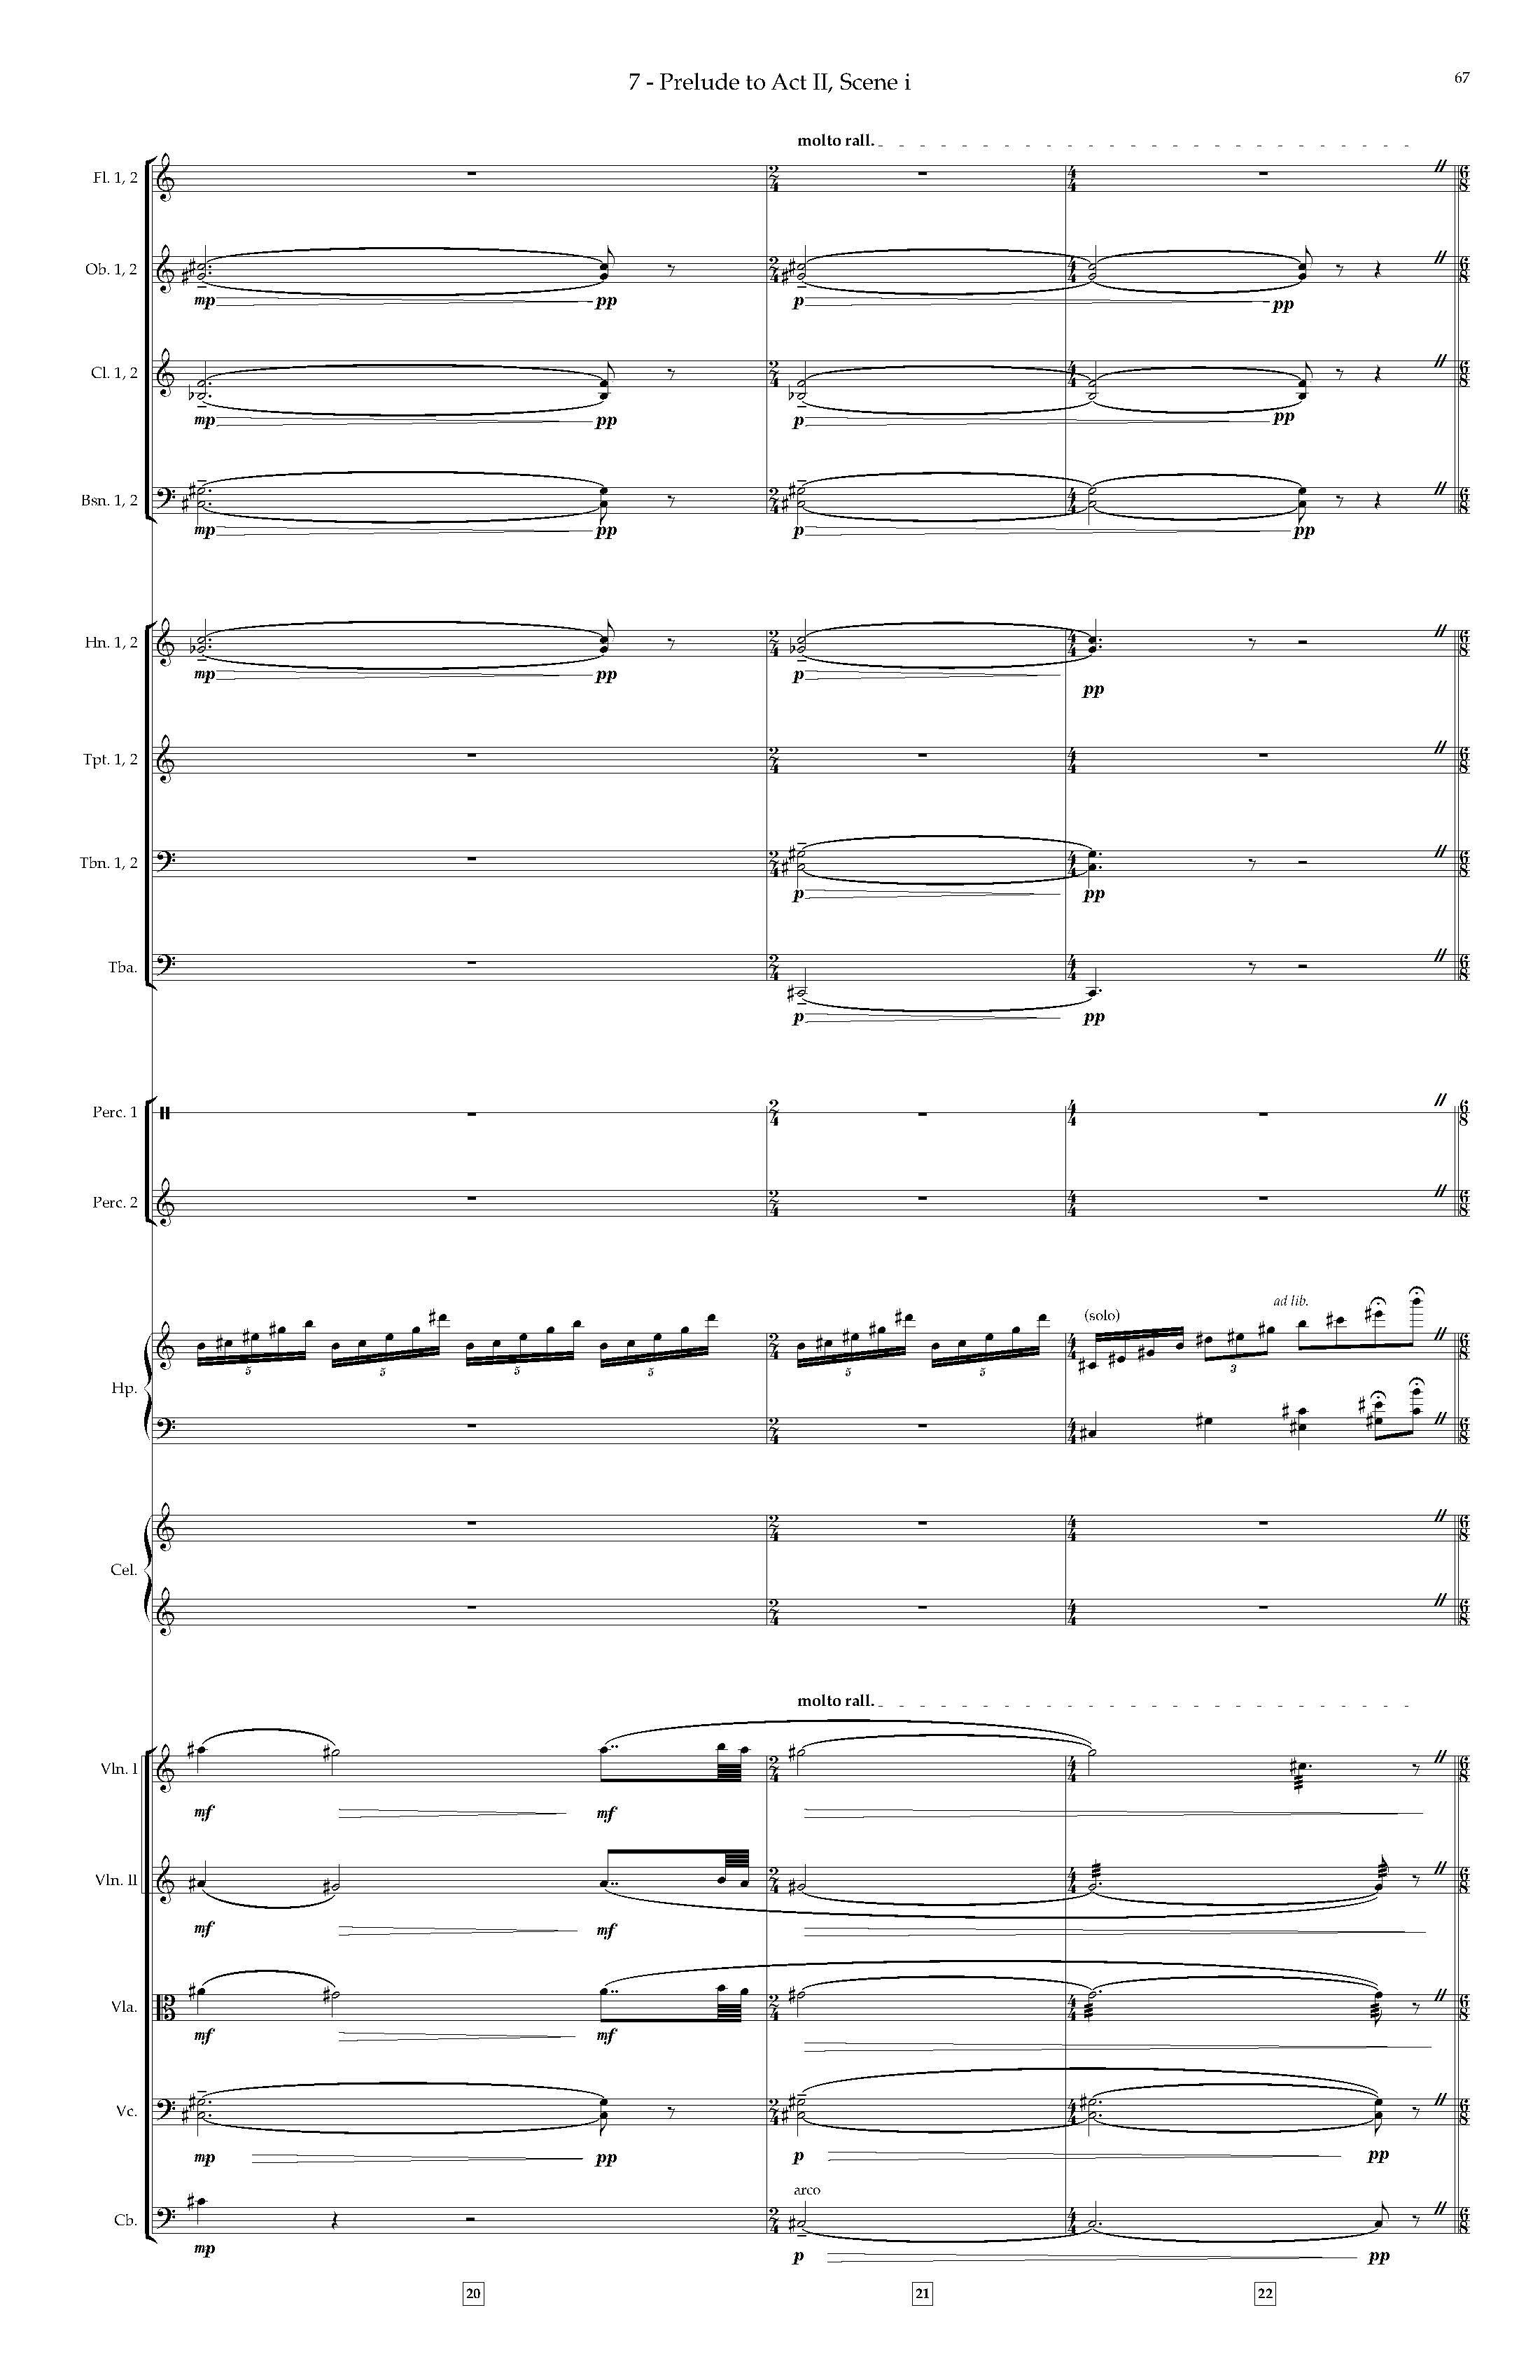 Arias and Interludes from HWGS - Complete Score_Page_73.jpg